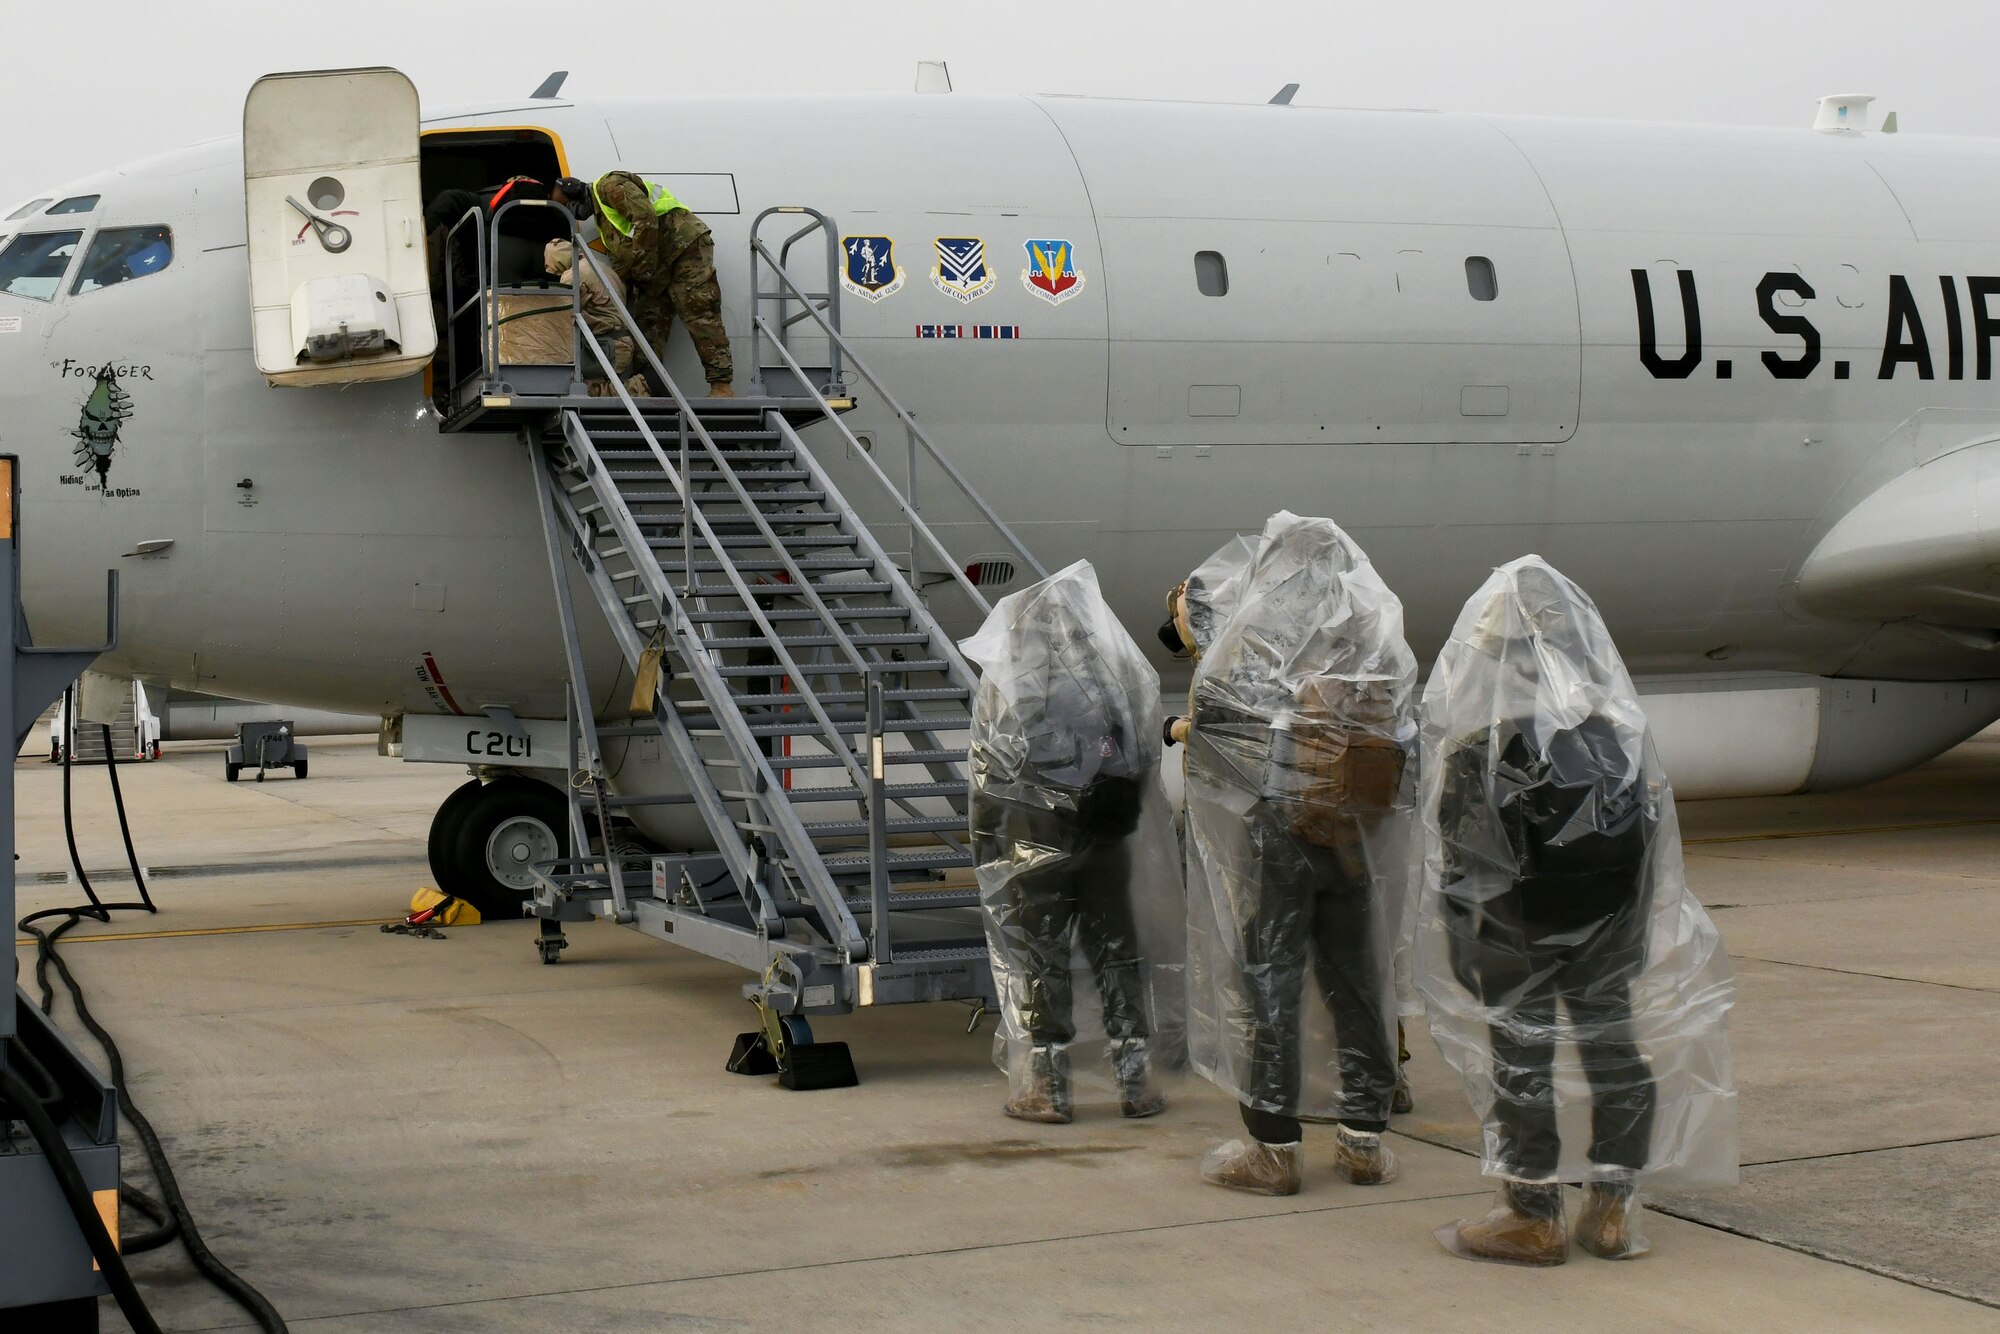 Photo shows Airmen lined up at foot of stairs waiting to board an aircraft.